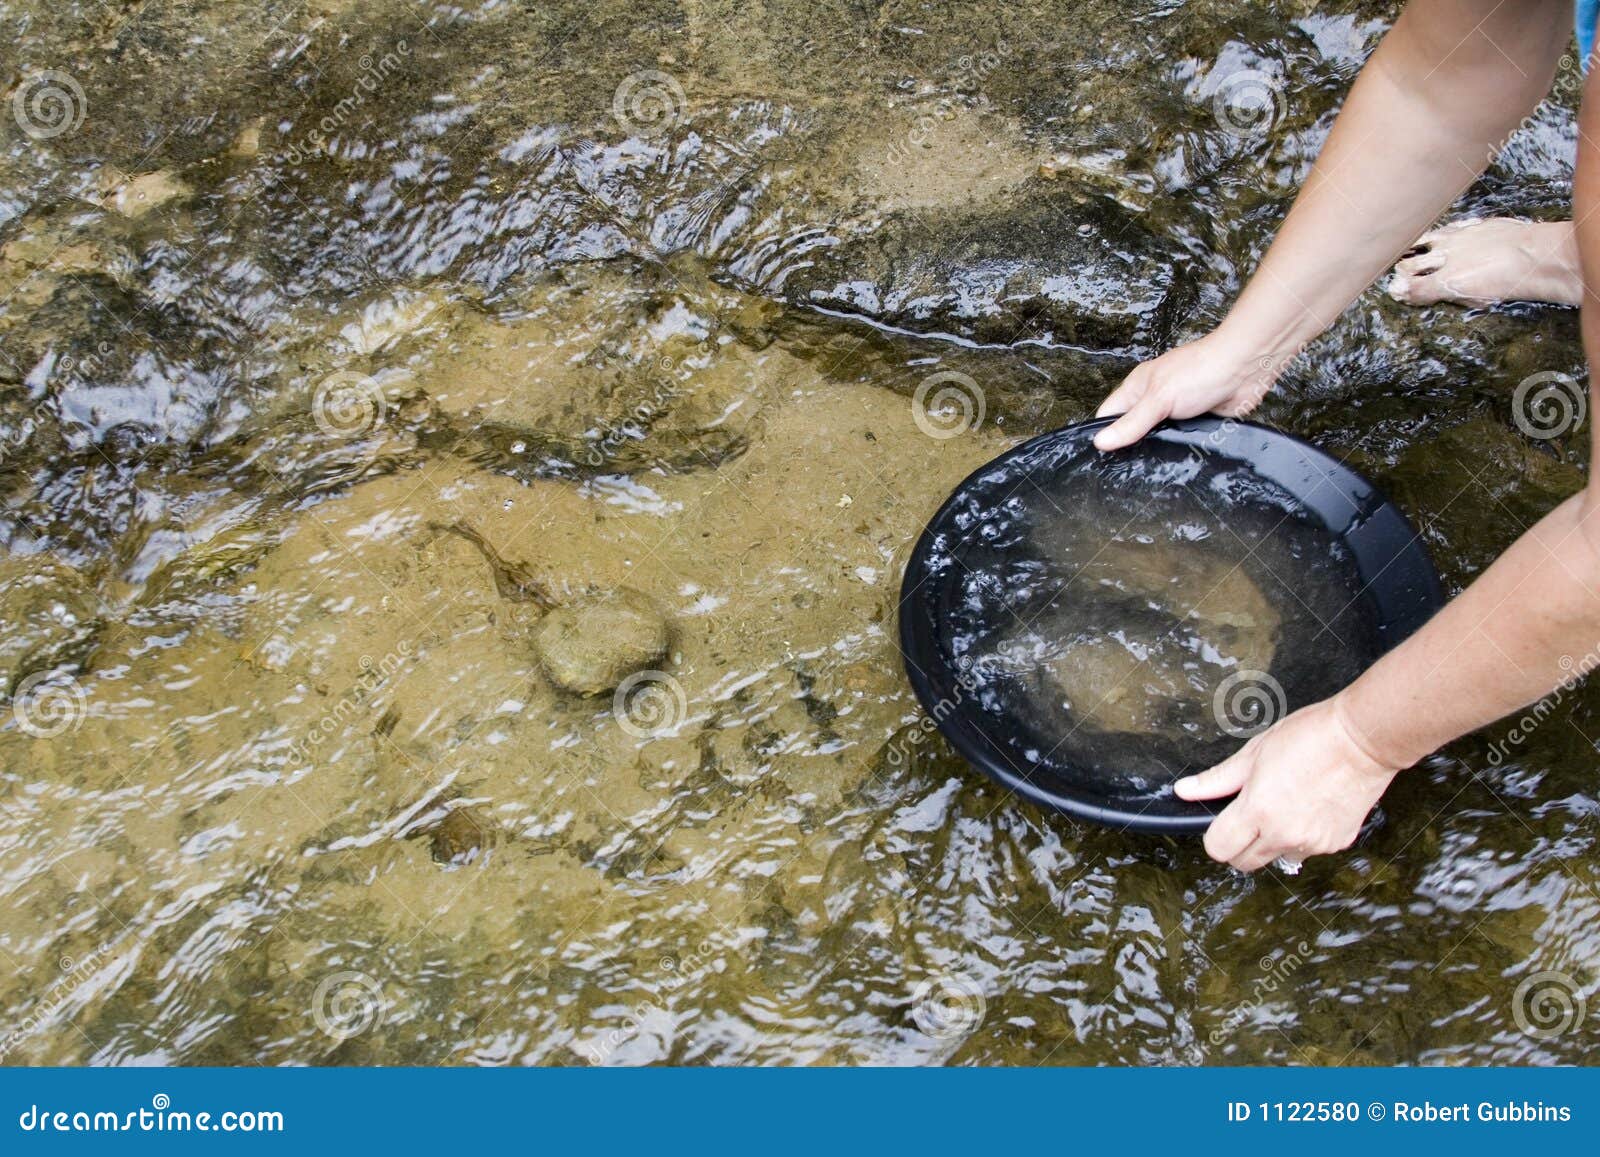 gold panning for gold